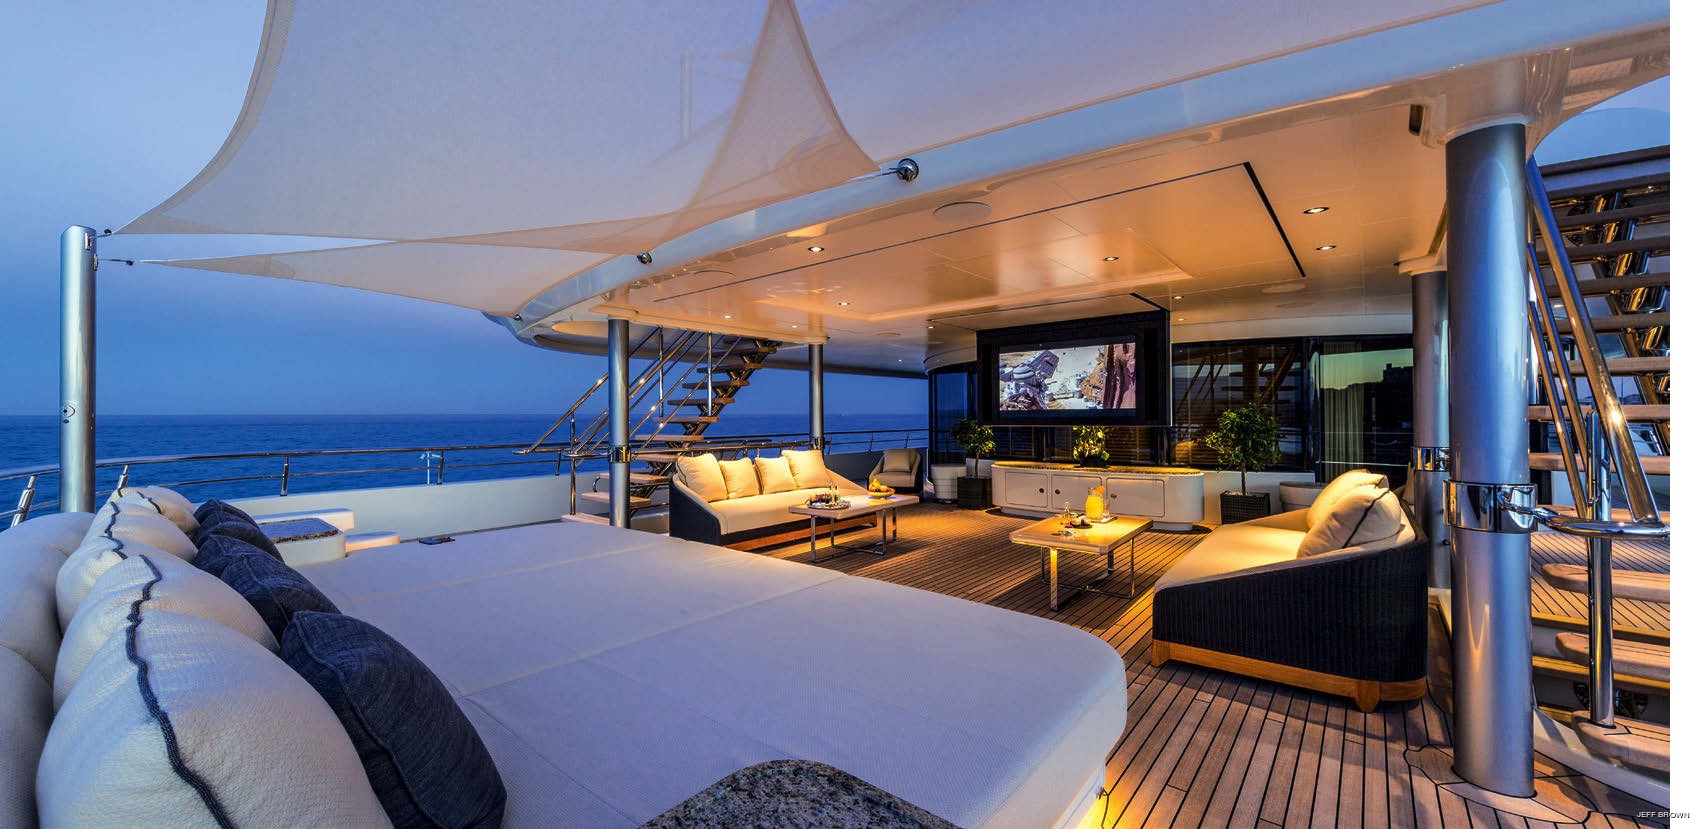 exterior lounging area with cinema under the stars